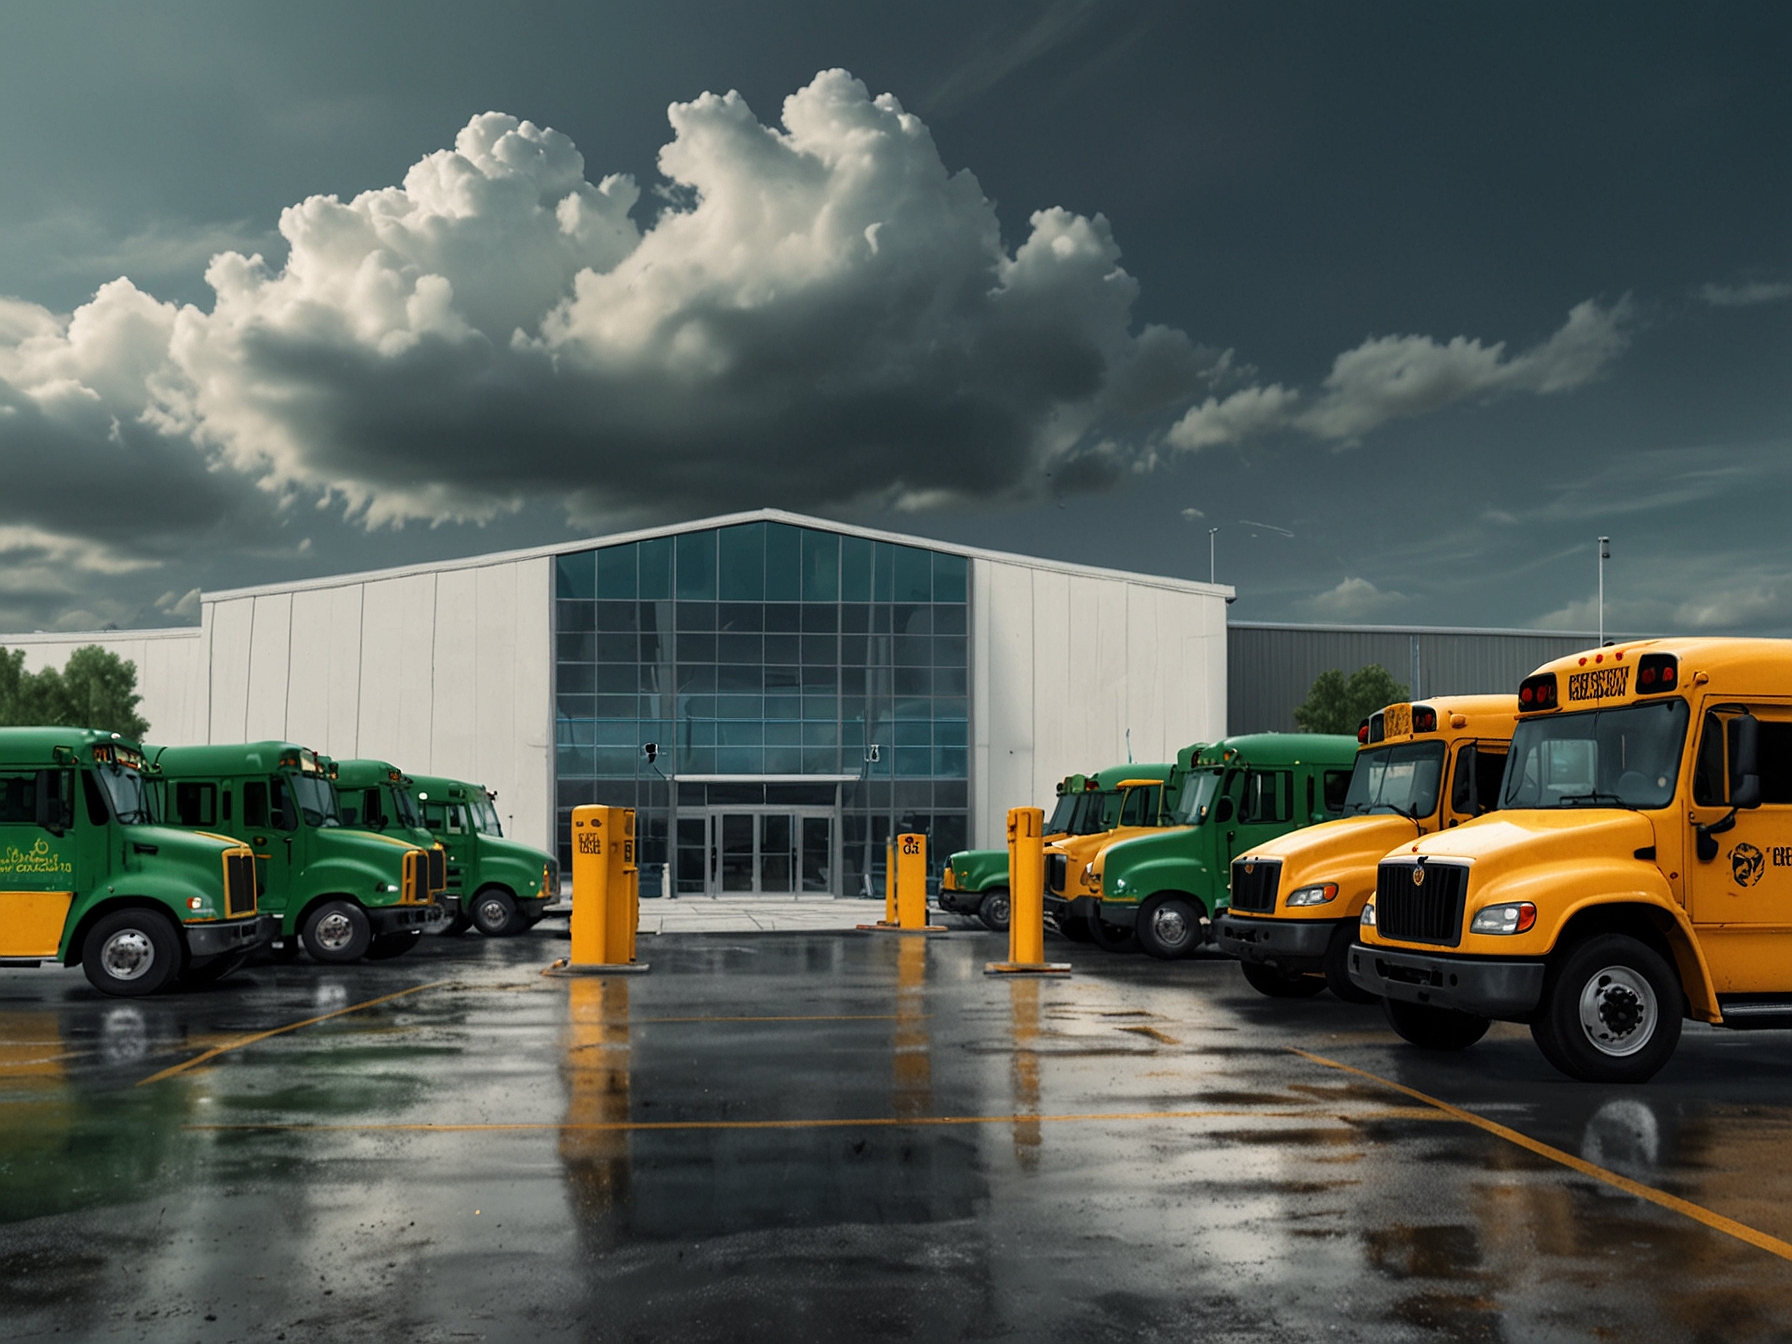 An image showing GreenPower's West Virginia manufacturing facility with several electric school buses, including Nano BEAST models, emphasizing the company's expansion and production capabilities.